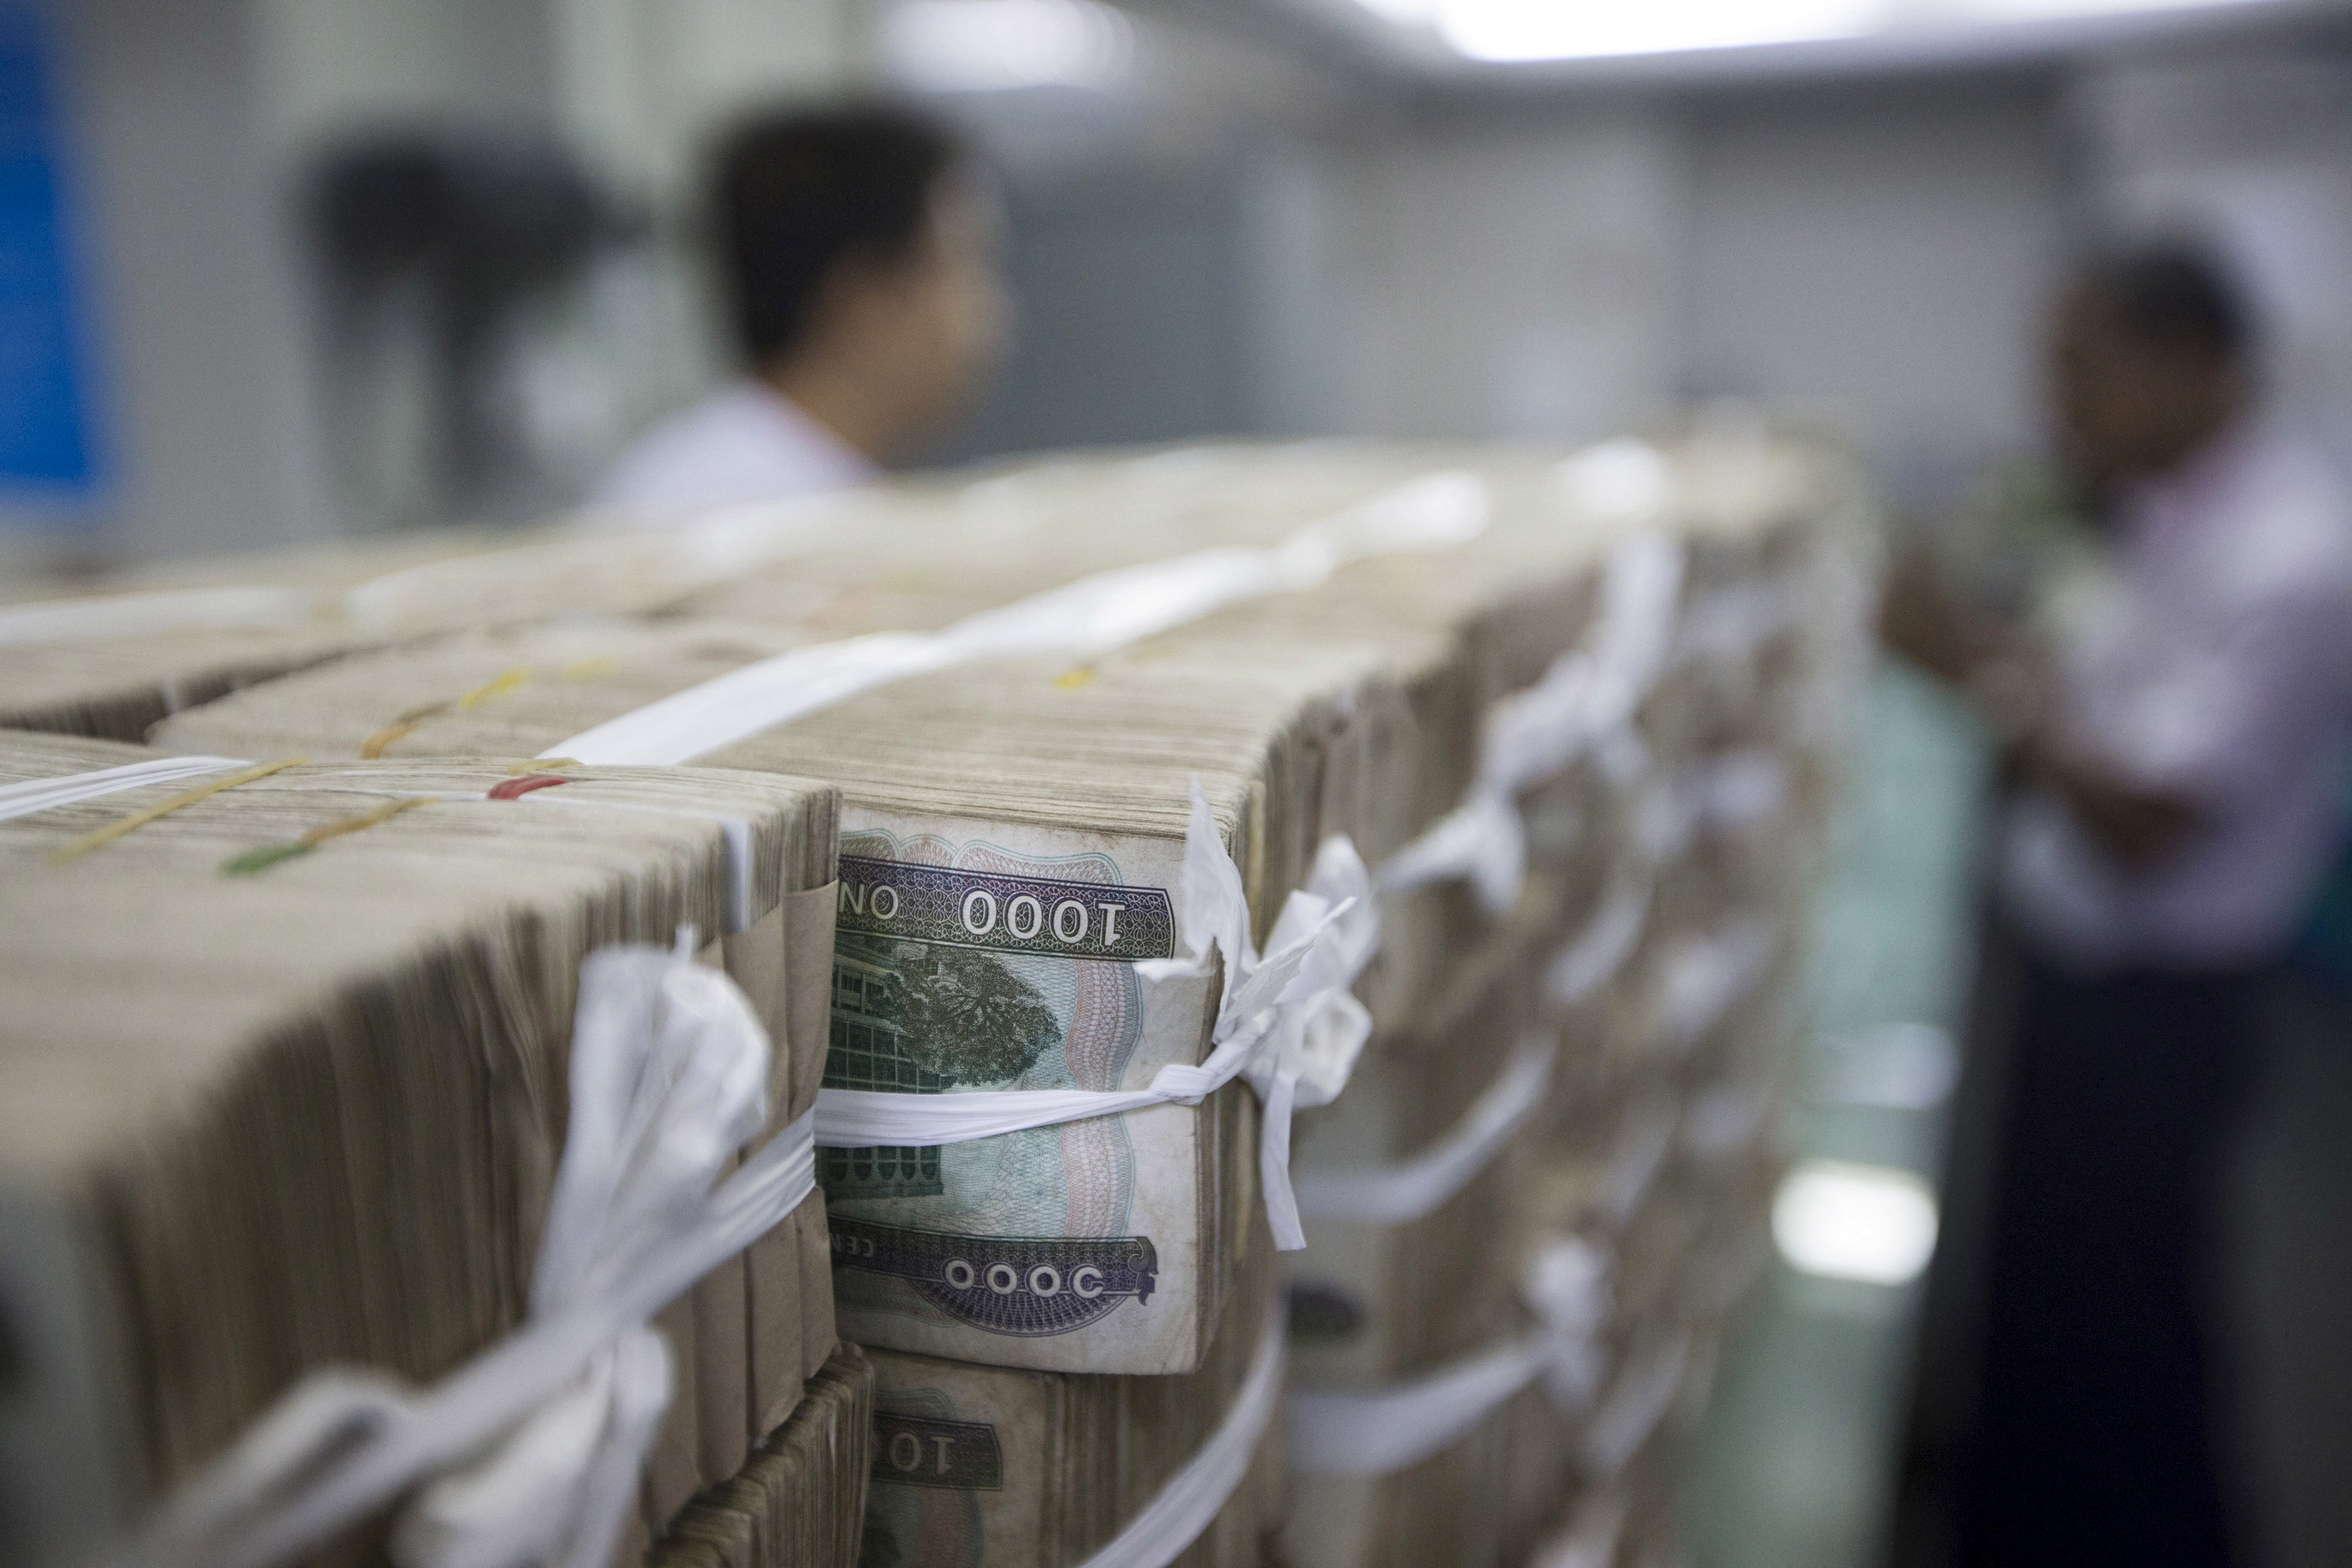 Stacks of Myanmar kyat are seen on the counter before a client collects them, at a bank in Yangon, Myanmar